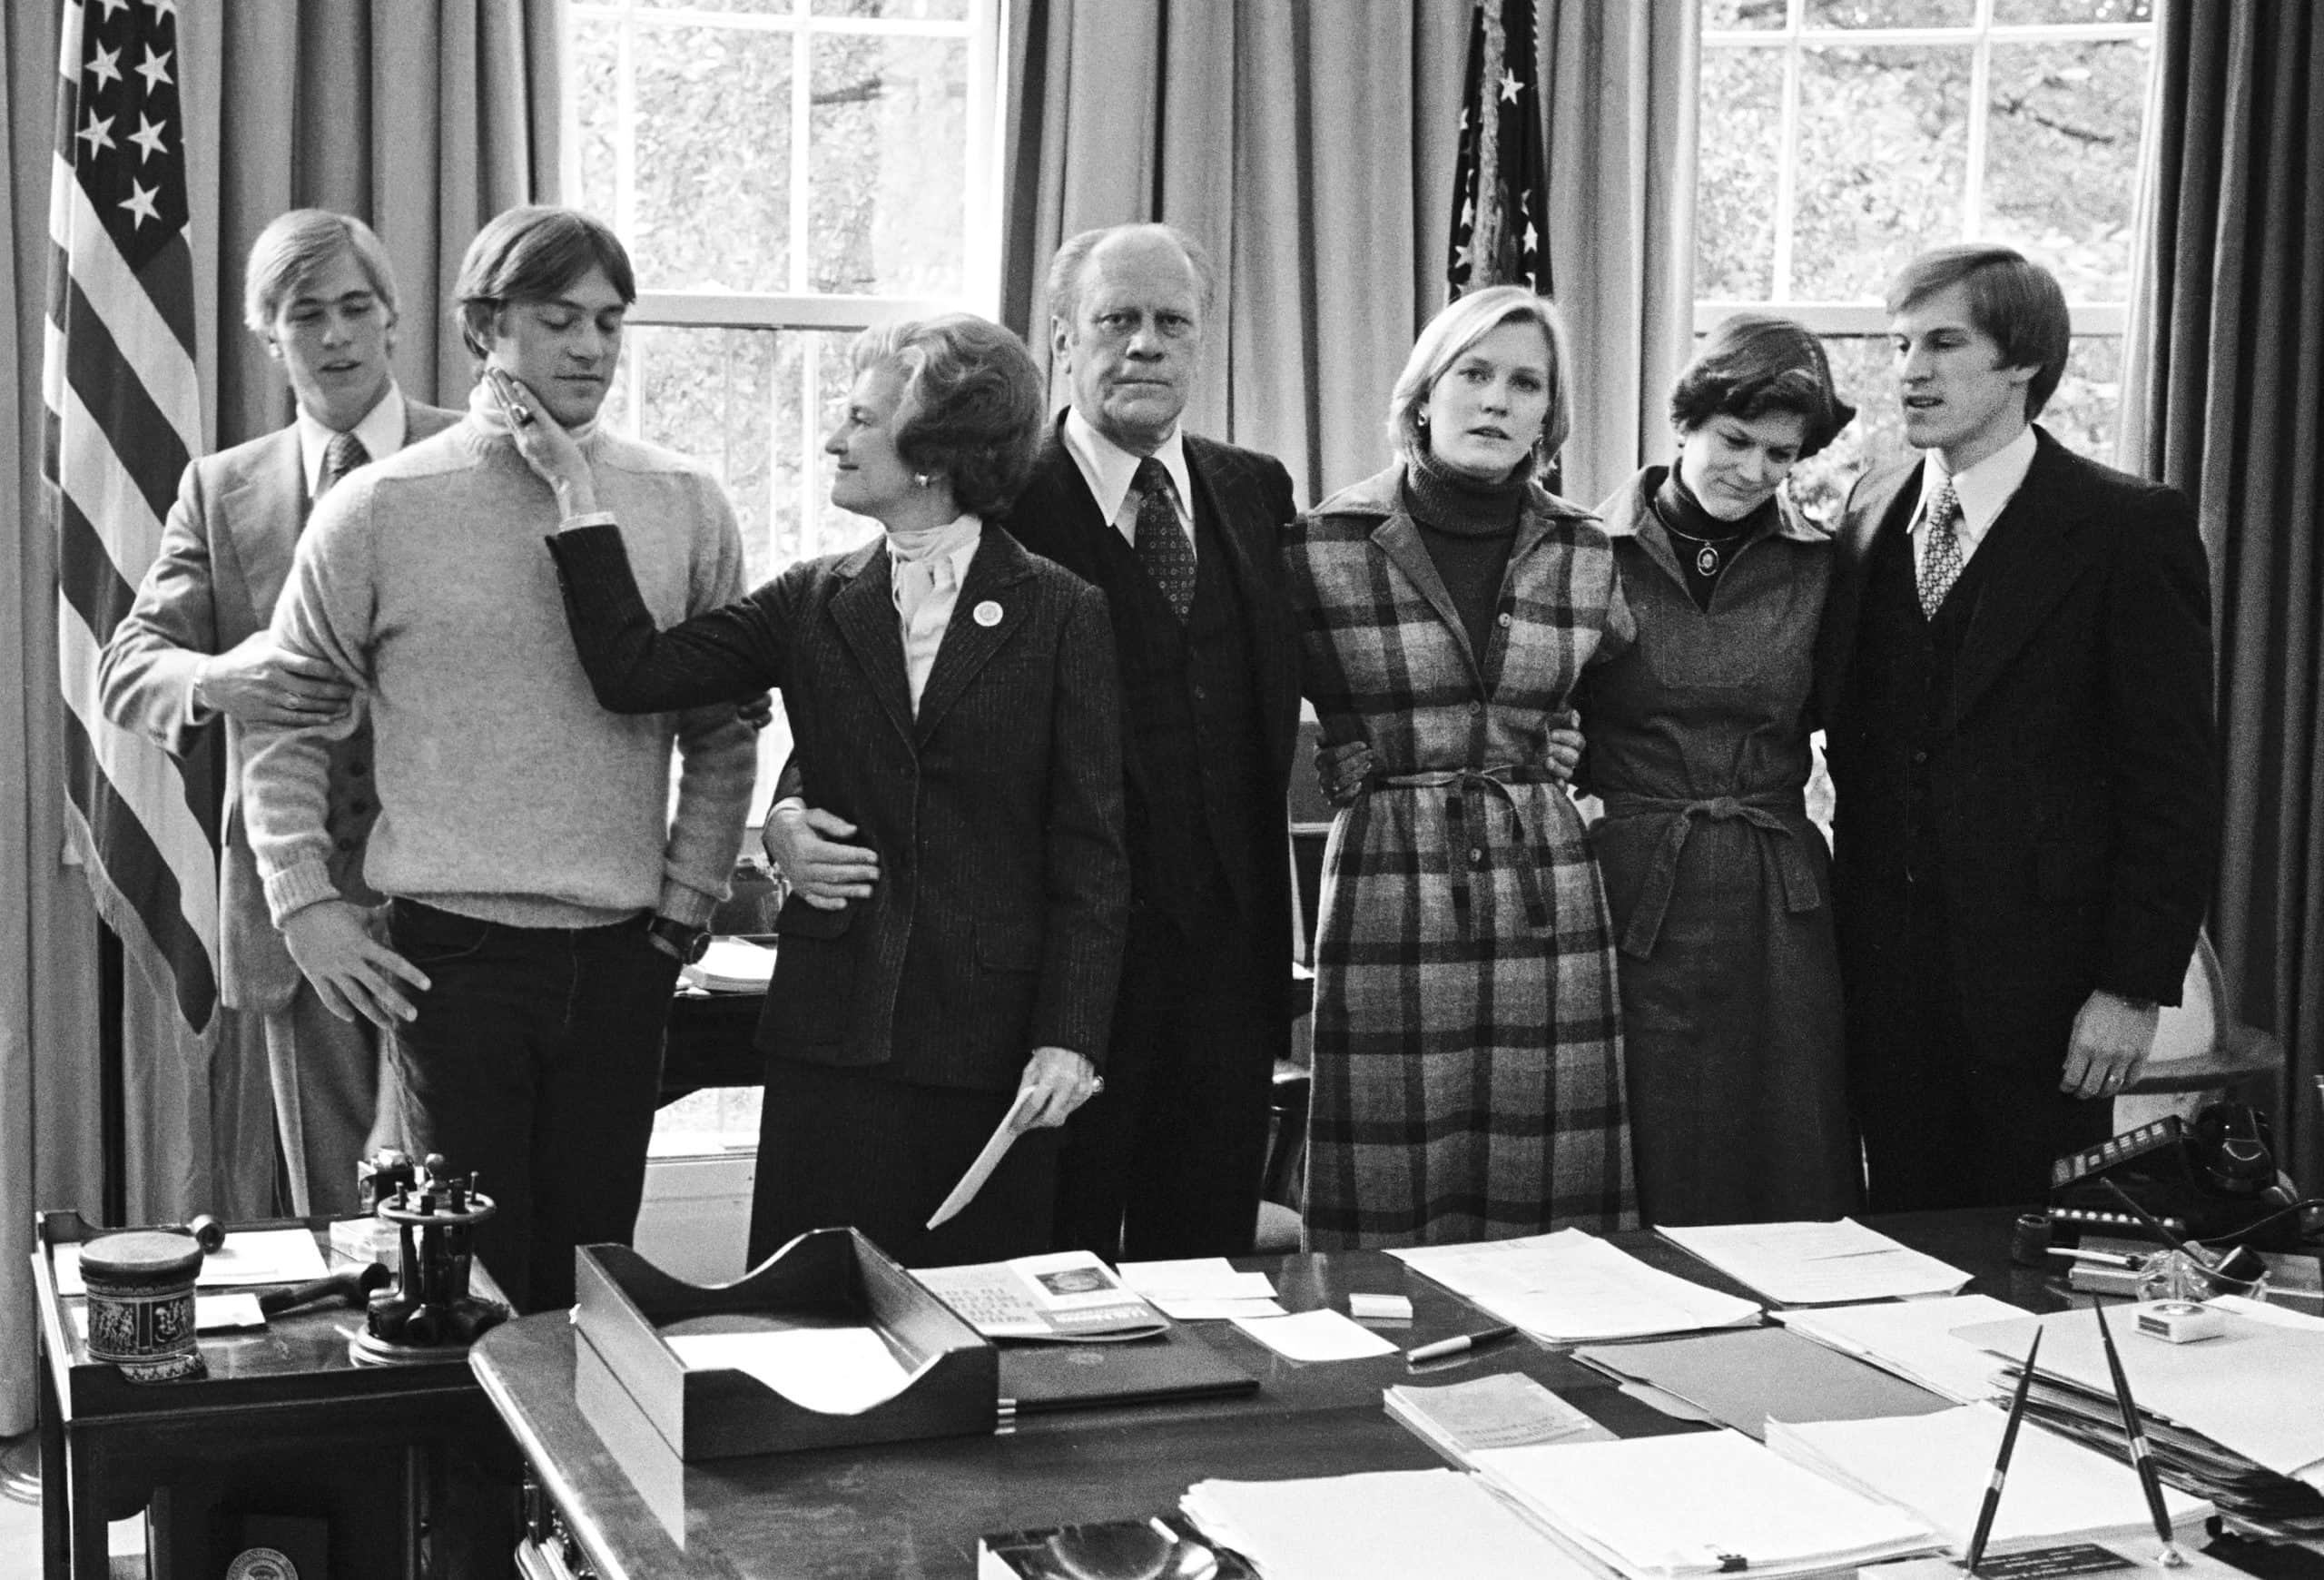 WASHINGTON DC - NOVEMBER 3: (NO U.S. TABLOID SALES) After President Ford conceded the election in a phone call to Jimmy Carter, the Ford
family gathers in the Oval Office, just before the public concession statement was read in the White House press room. Mrs. Ford delivered the remarks because the president had lost his voice during the final days of the campaign November 3, 1976, in Washington, DC. From left are sons Steve and Jack, daughter Susan, daughter in-law Gayle, and son Mike. (Photo by David Hume Kennerly/ Getty Images)